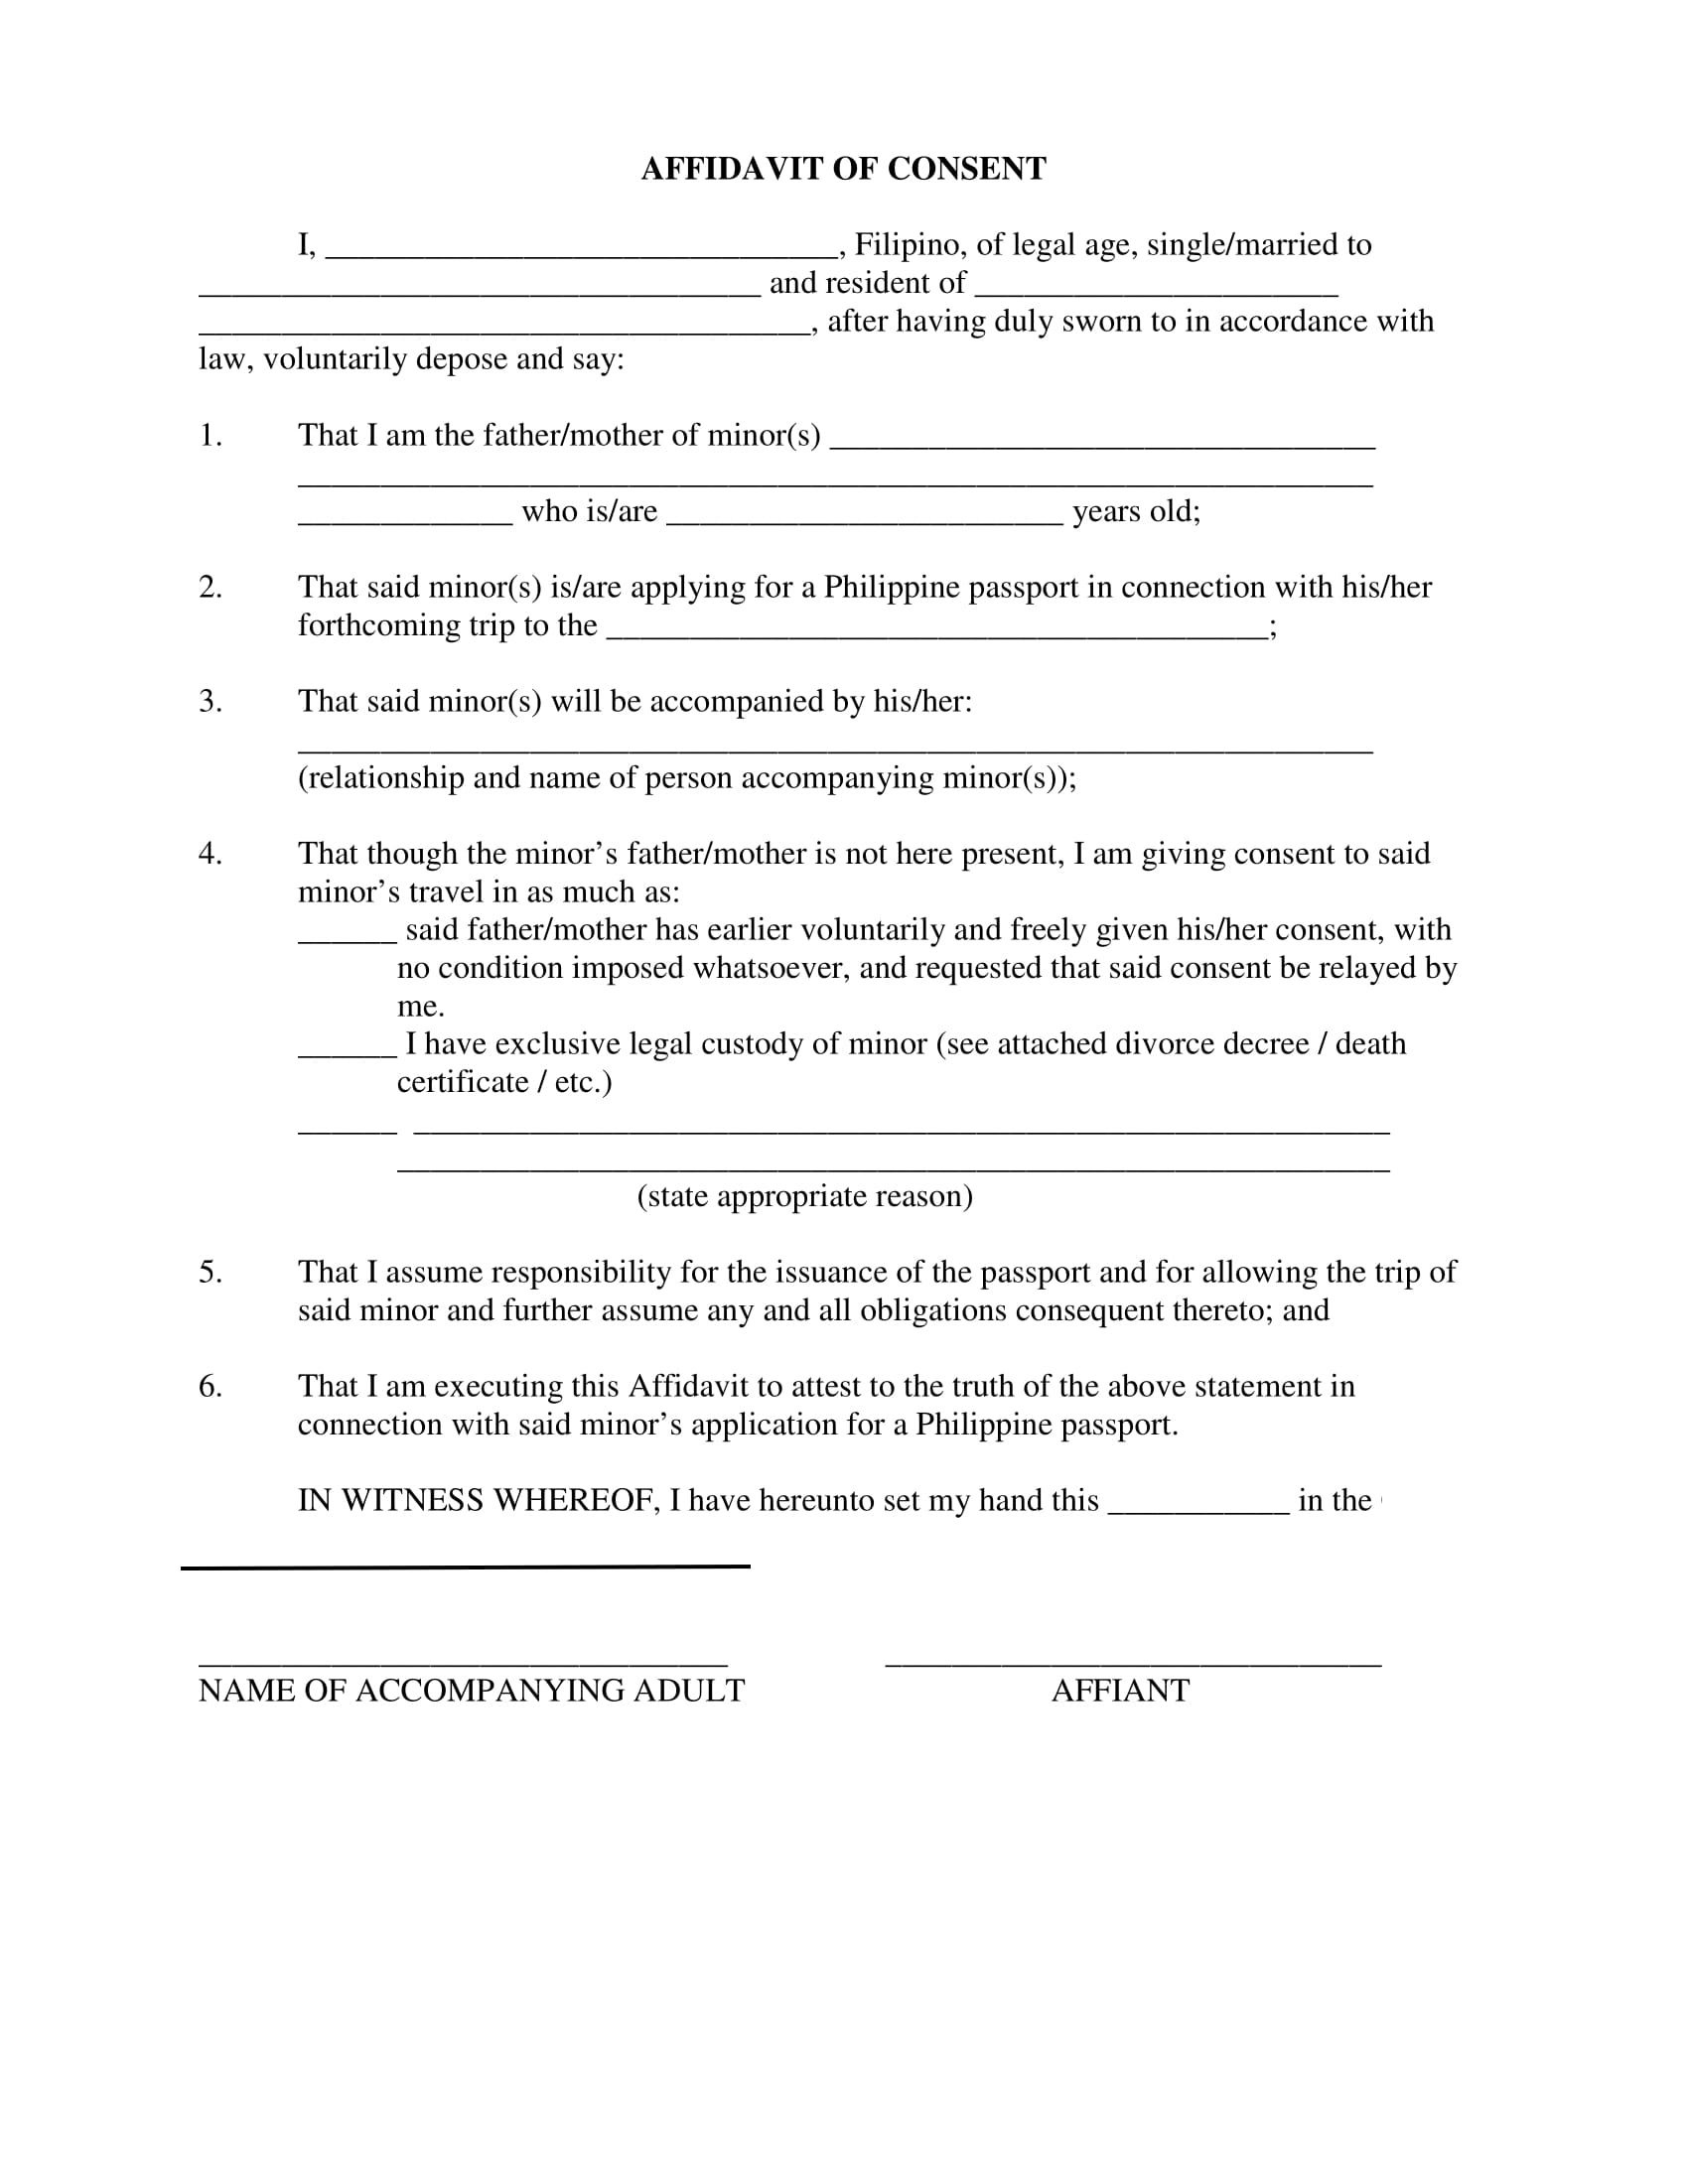 amosup consent form pdf download